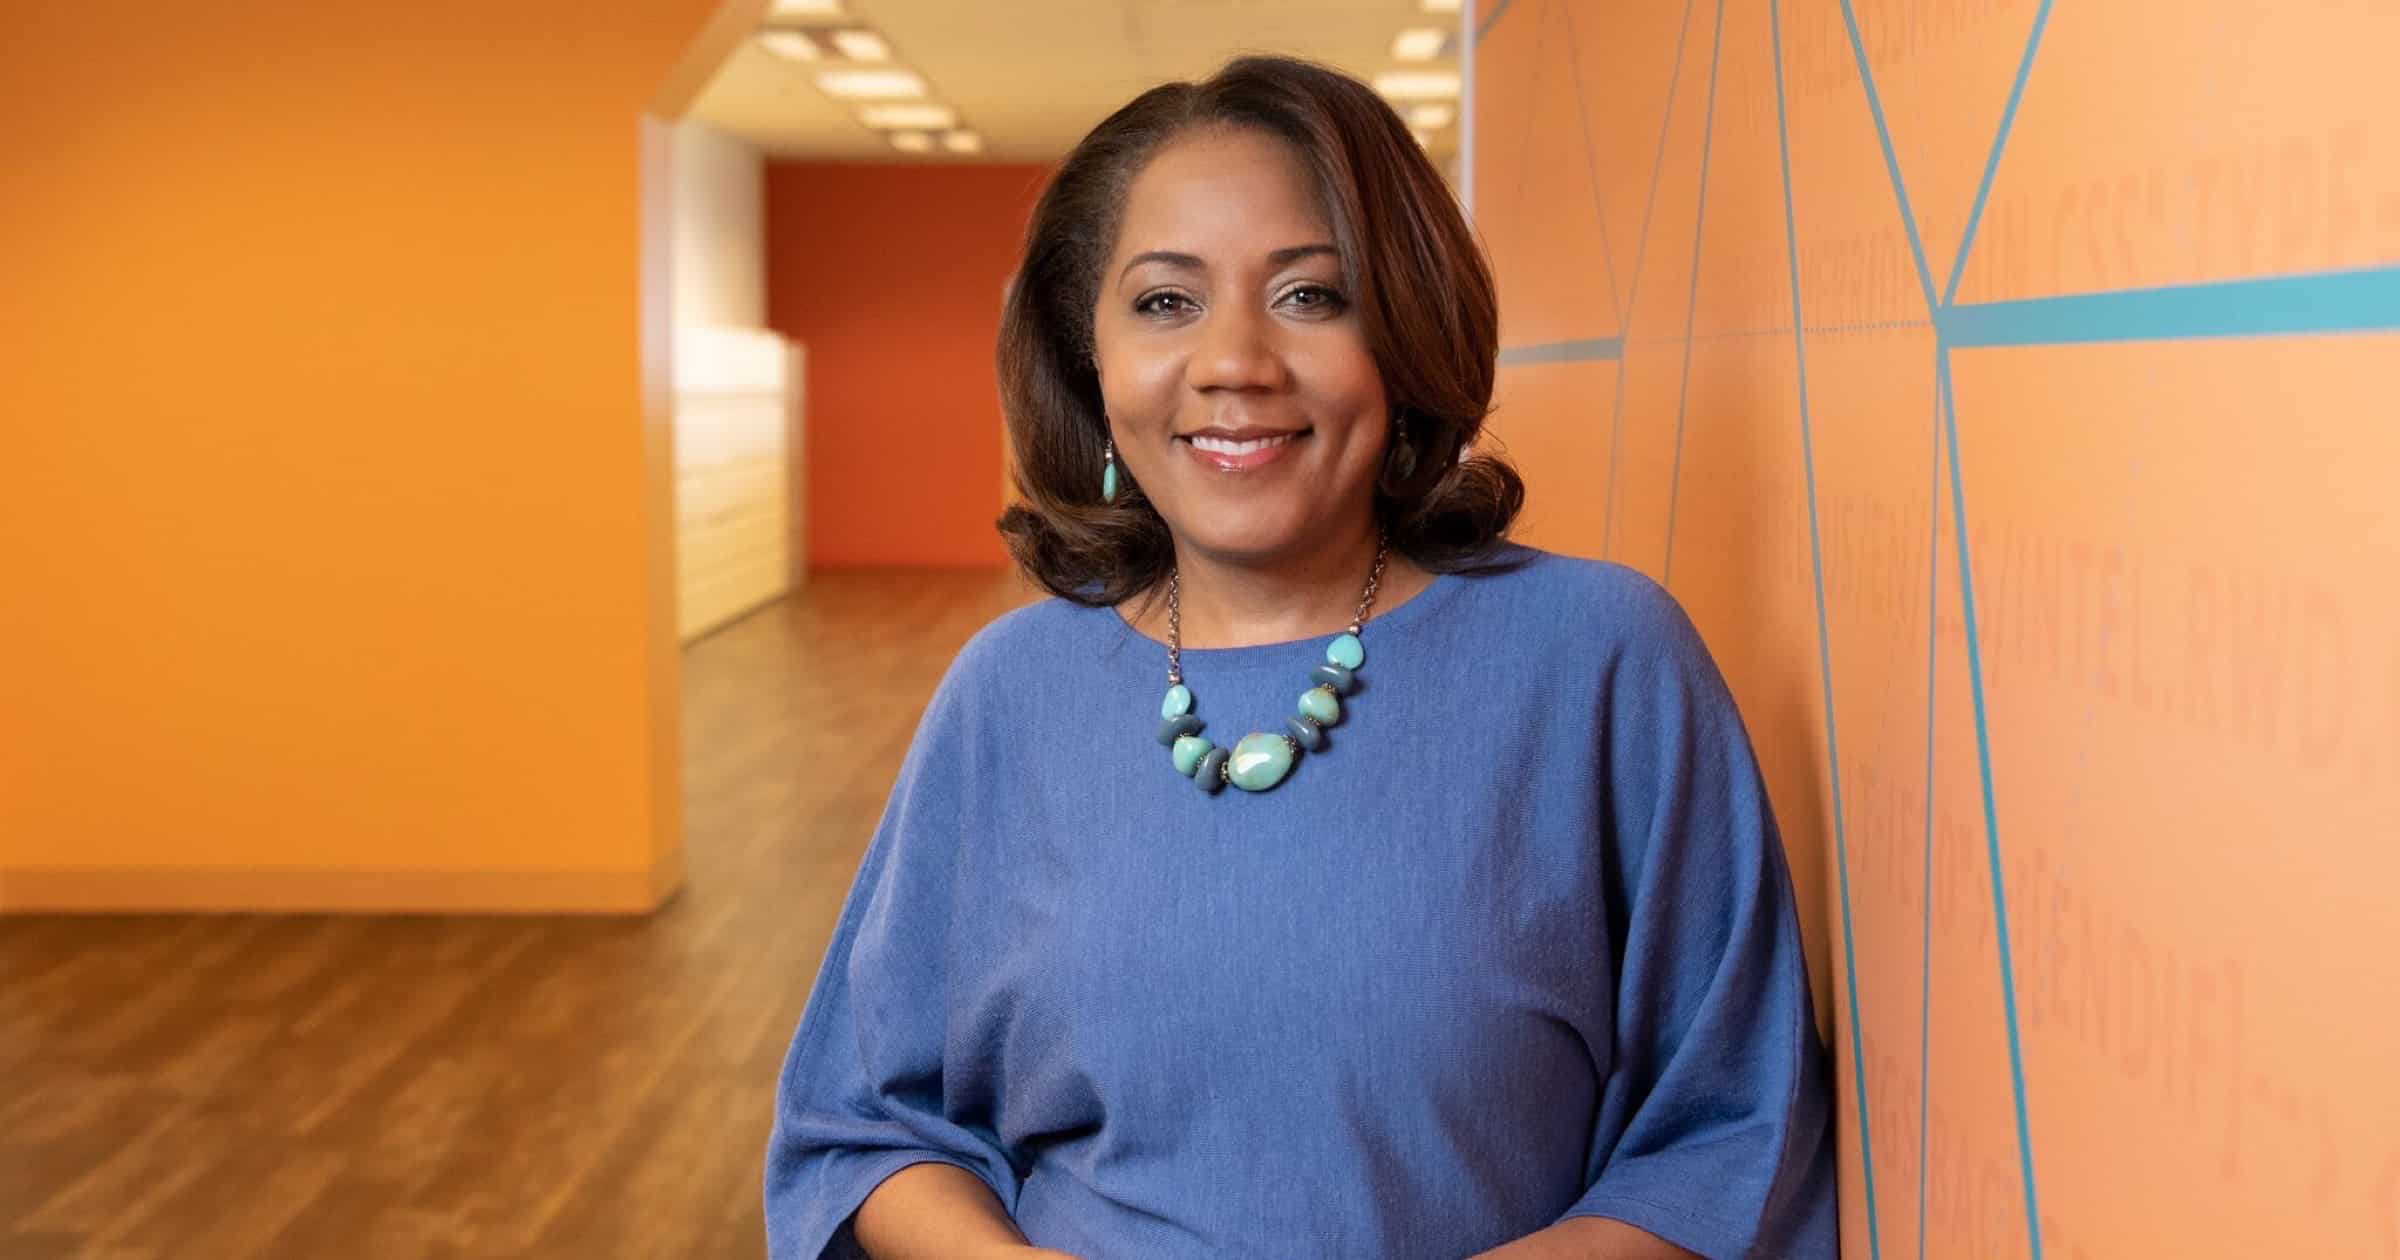 Apple Hires Barbara Whye From Intel as Head of Diversity